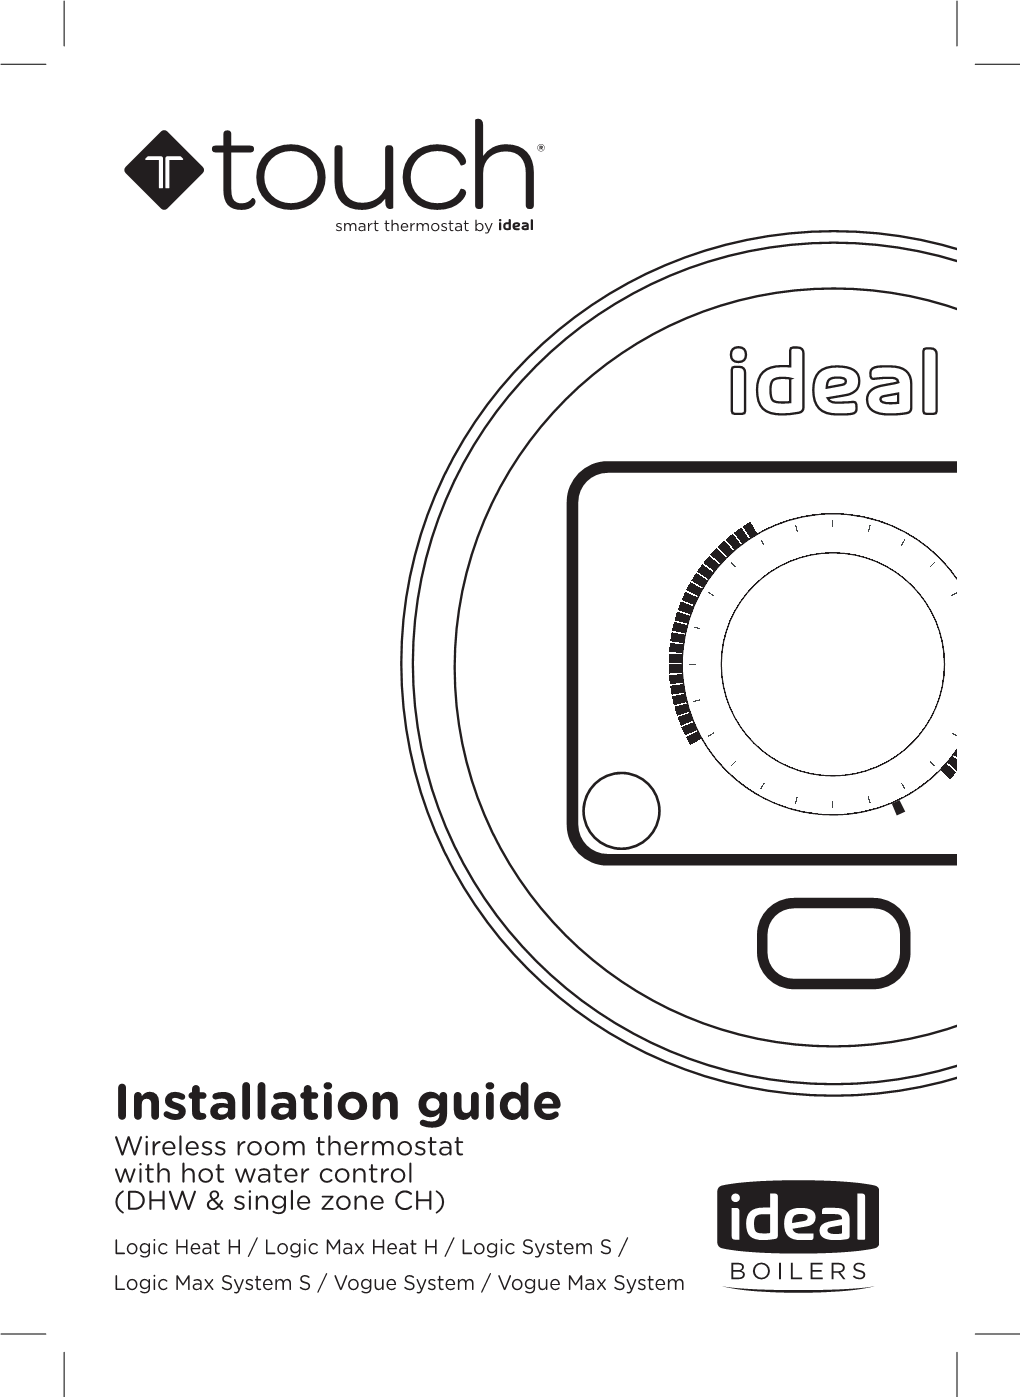 Touch Heat and System Installation Guide